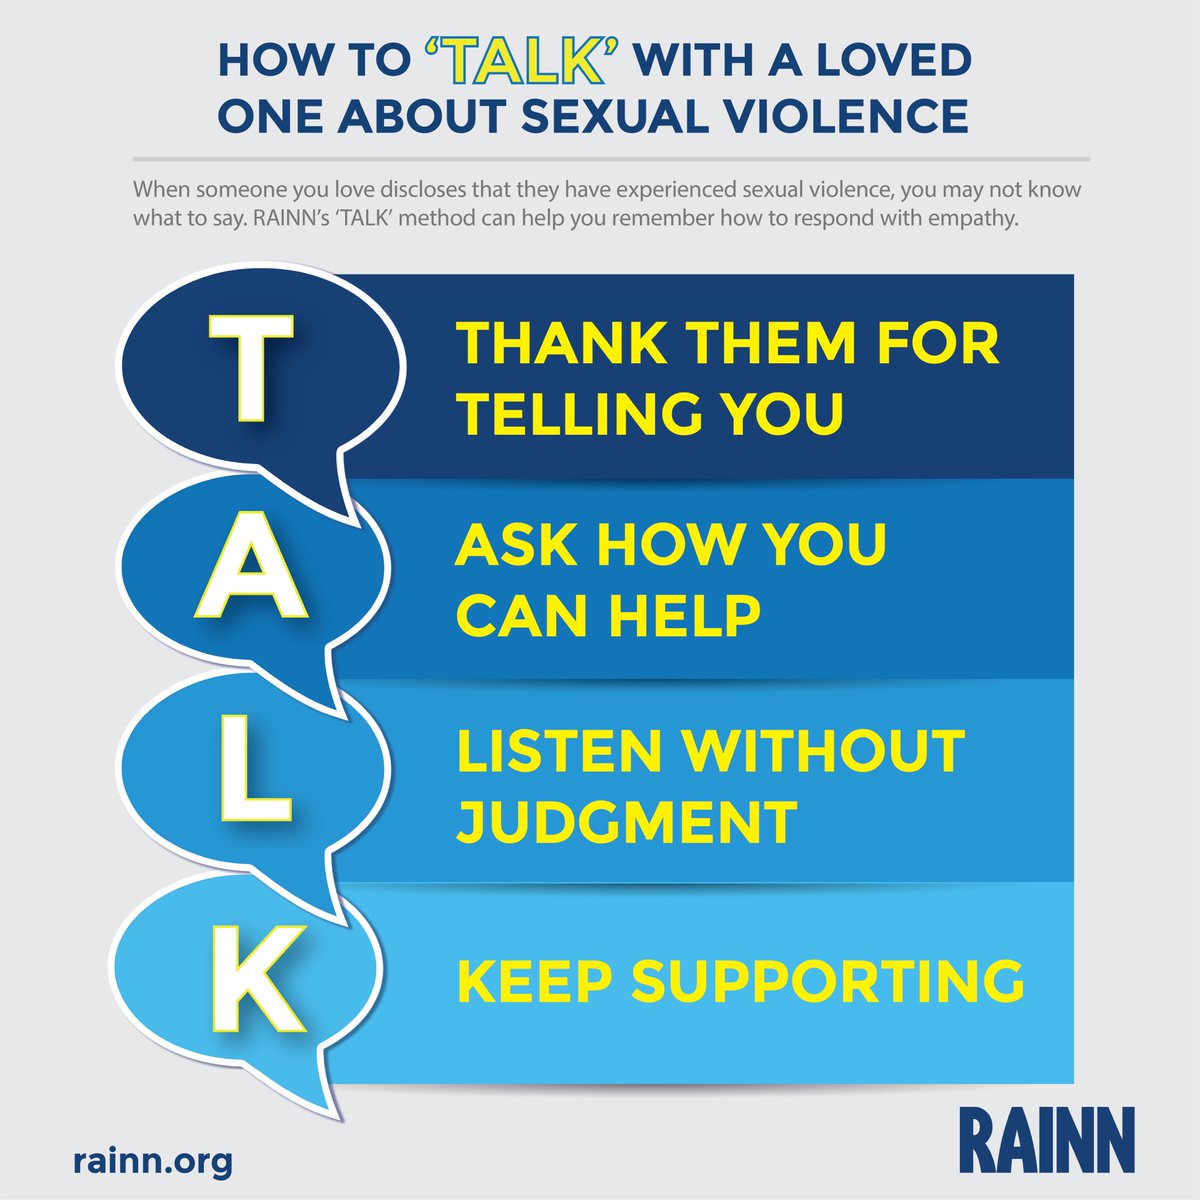 Finally, if you see a survivor sharing their story on the timeline or someone discloses to you personally, keep our TALK method in mind to help you respond empathetically. We have a detailed toolkit on how to support survivors after disclosure here:  https://rainn.org/sites/default/files/Toolkit.pdf